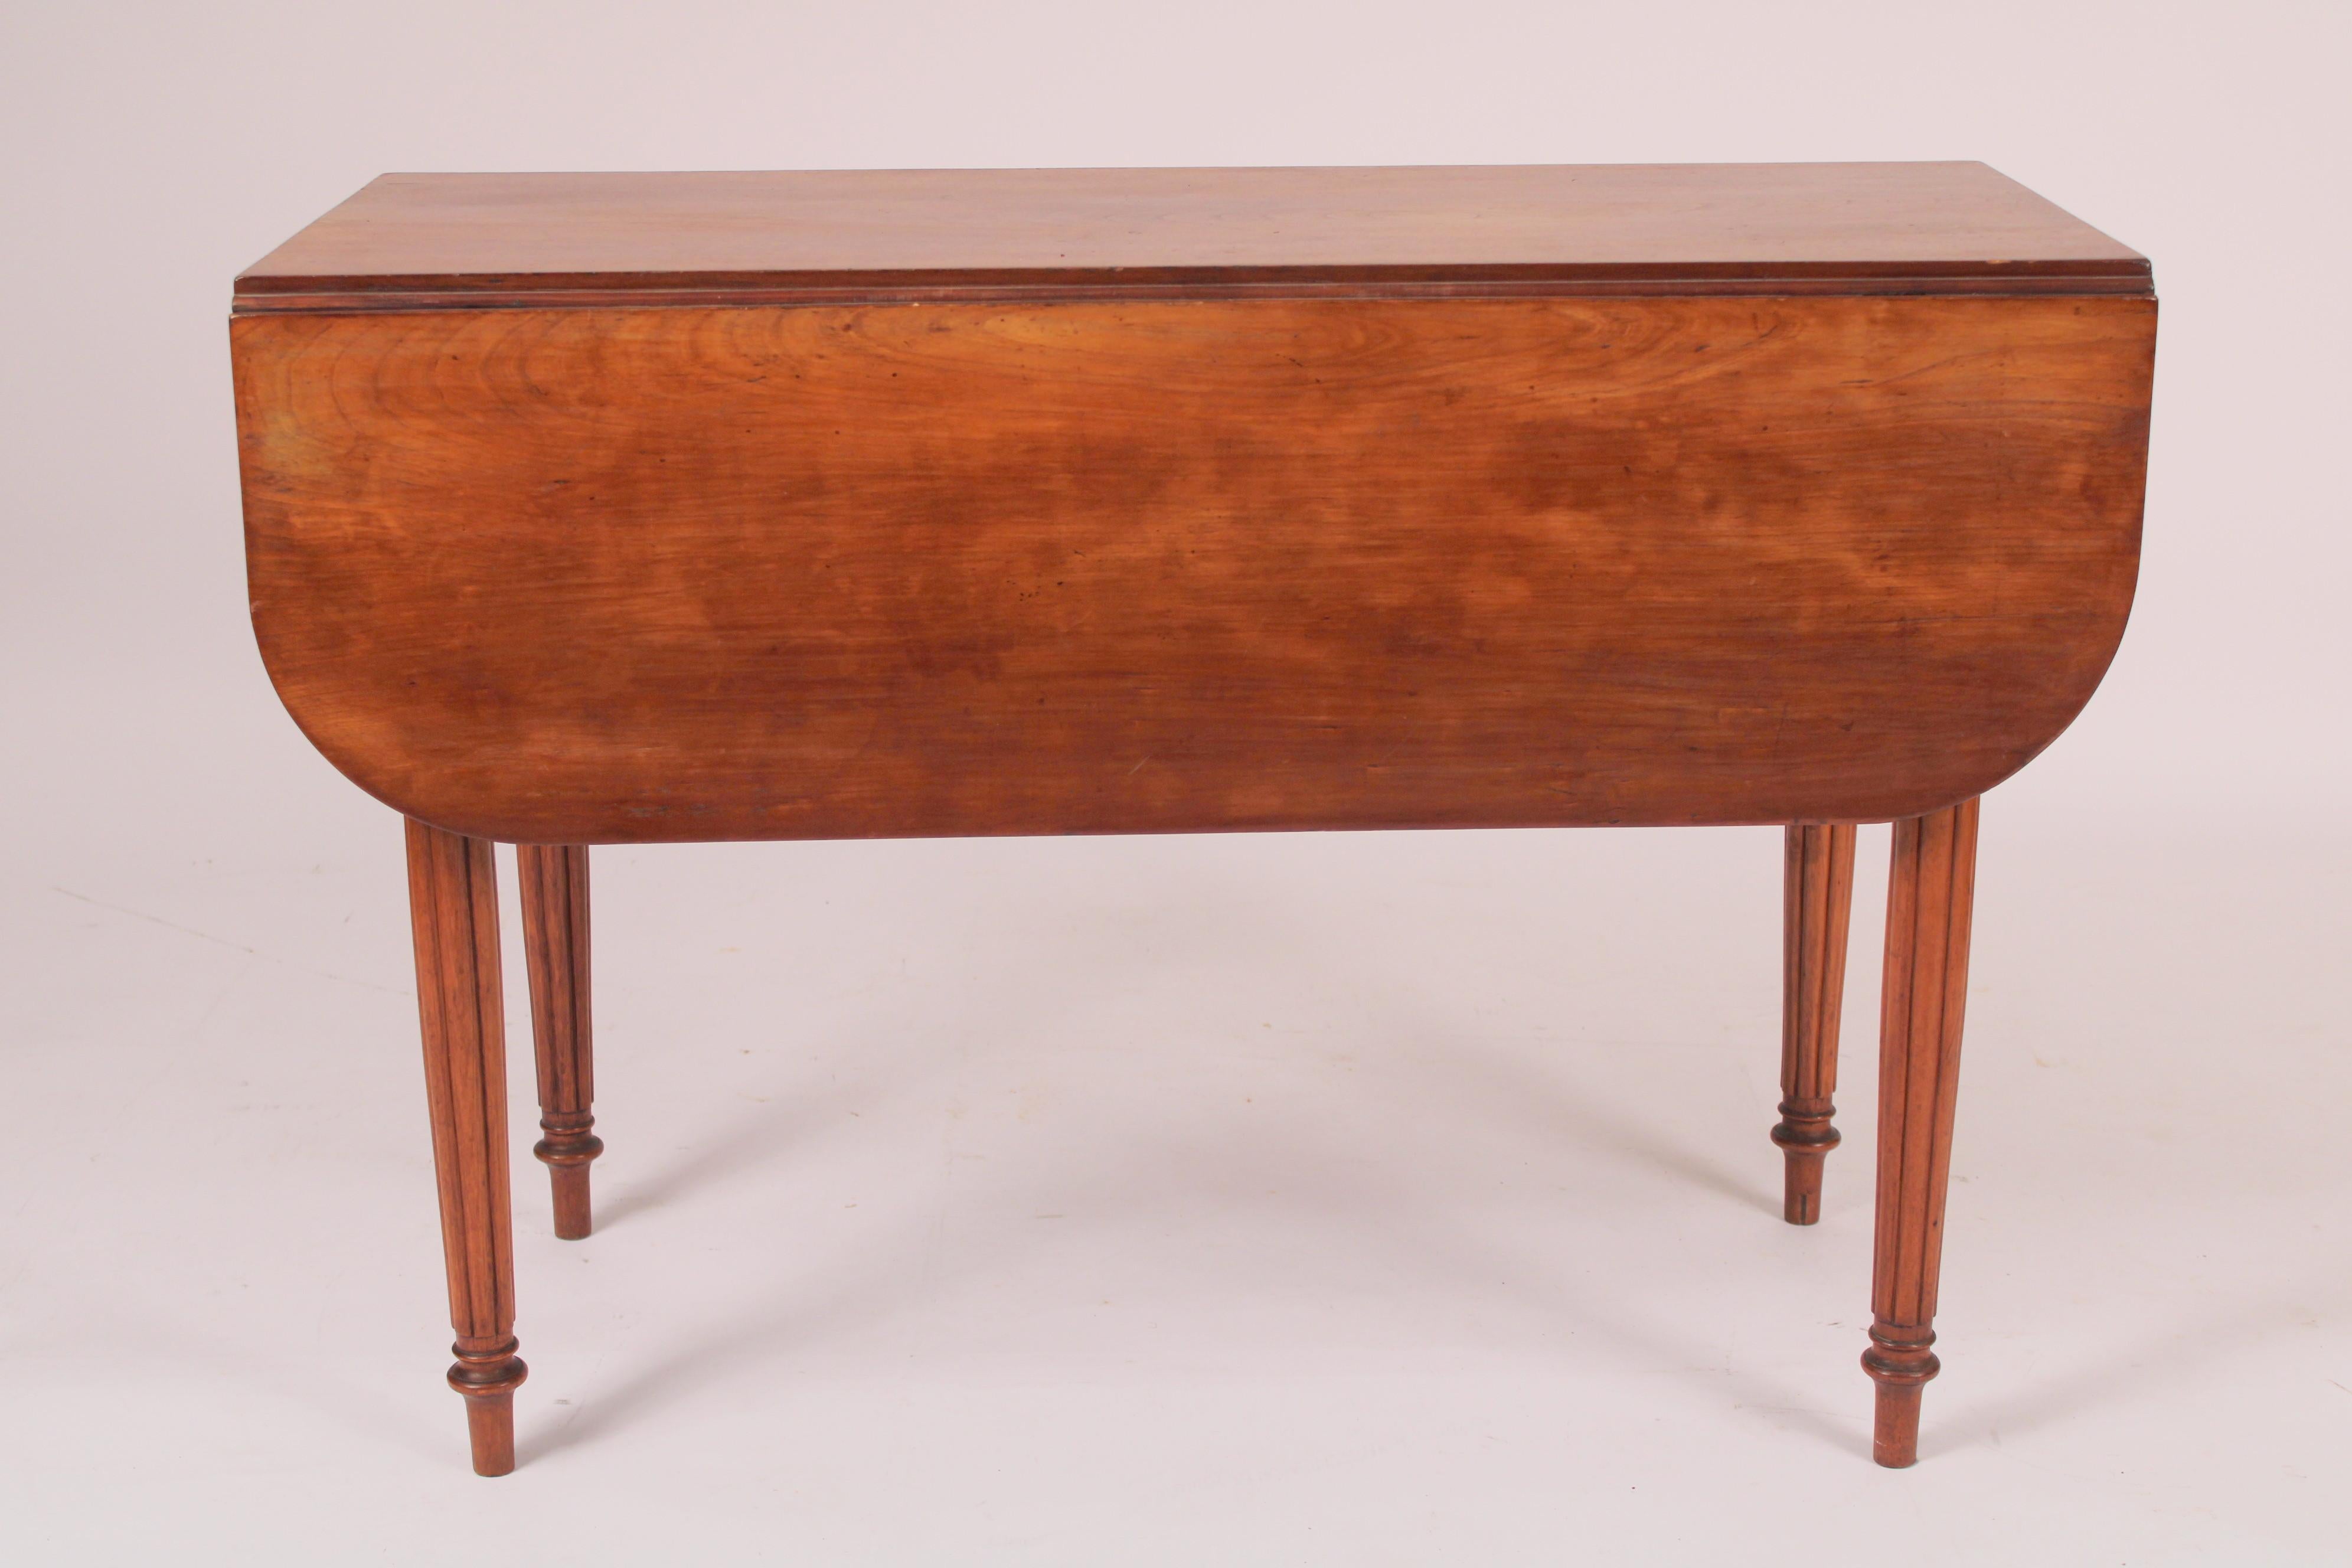 American cherry wood drop leaf table, early 19th century. With two drop leafs, one drawer, resting on reeded legs. The cherry wood has nice old color. Very functional table that could be used as extra dining, games table or folded down as a sofa